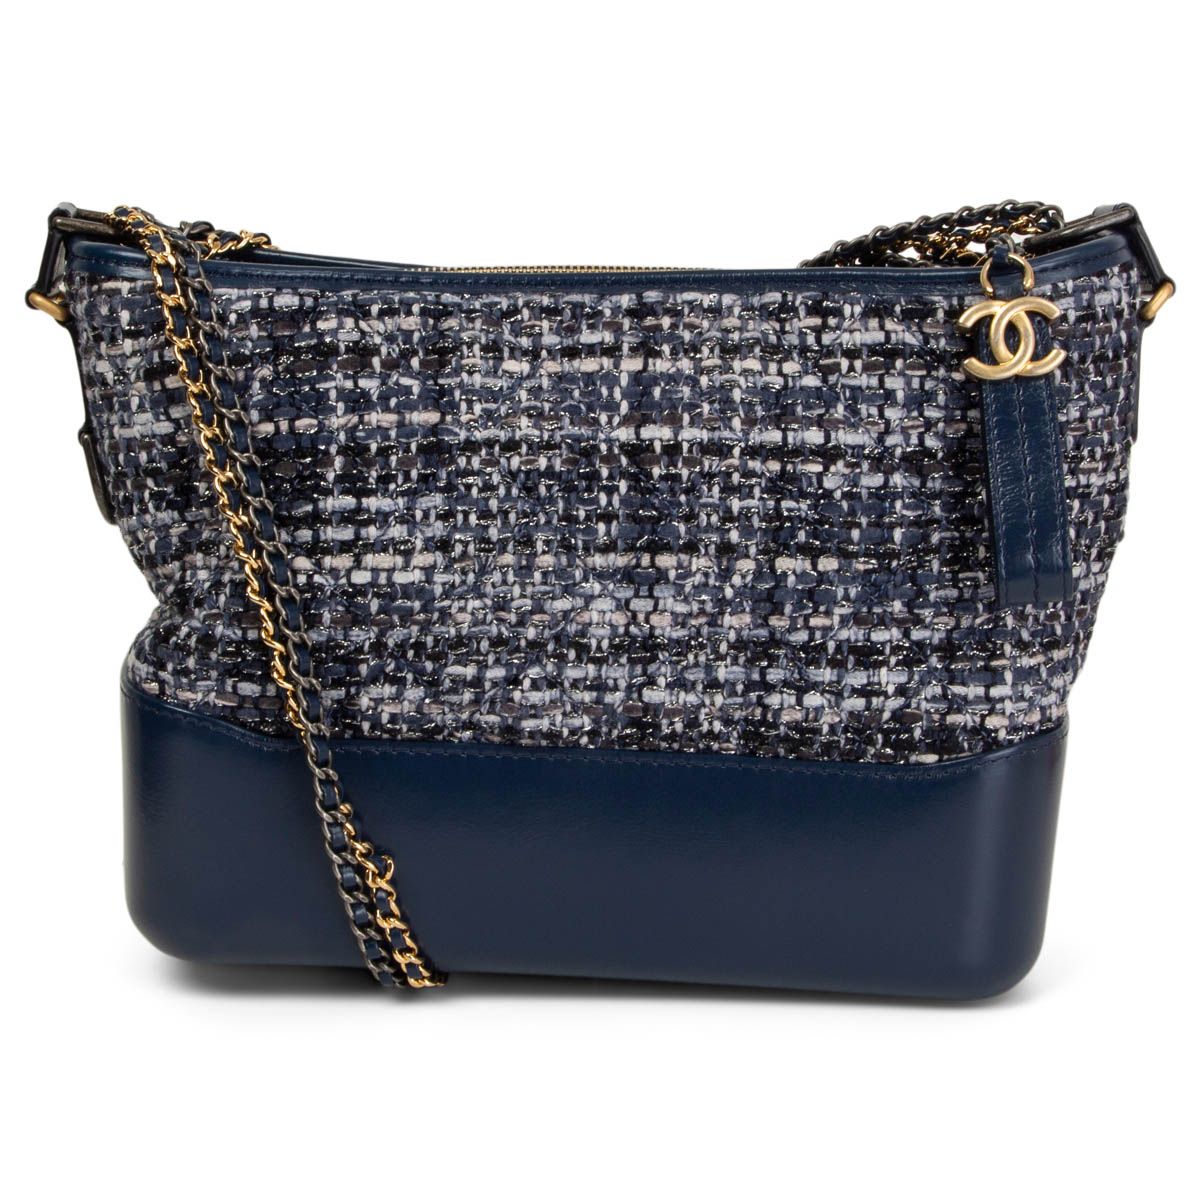 Chanel - Authenticated Gabrielle Handbag - Tweed Blue for Women, Good Condition